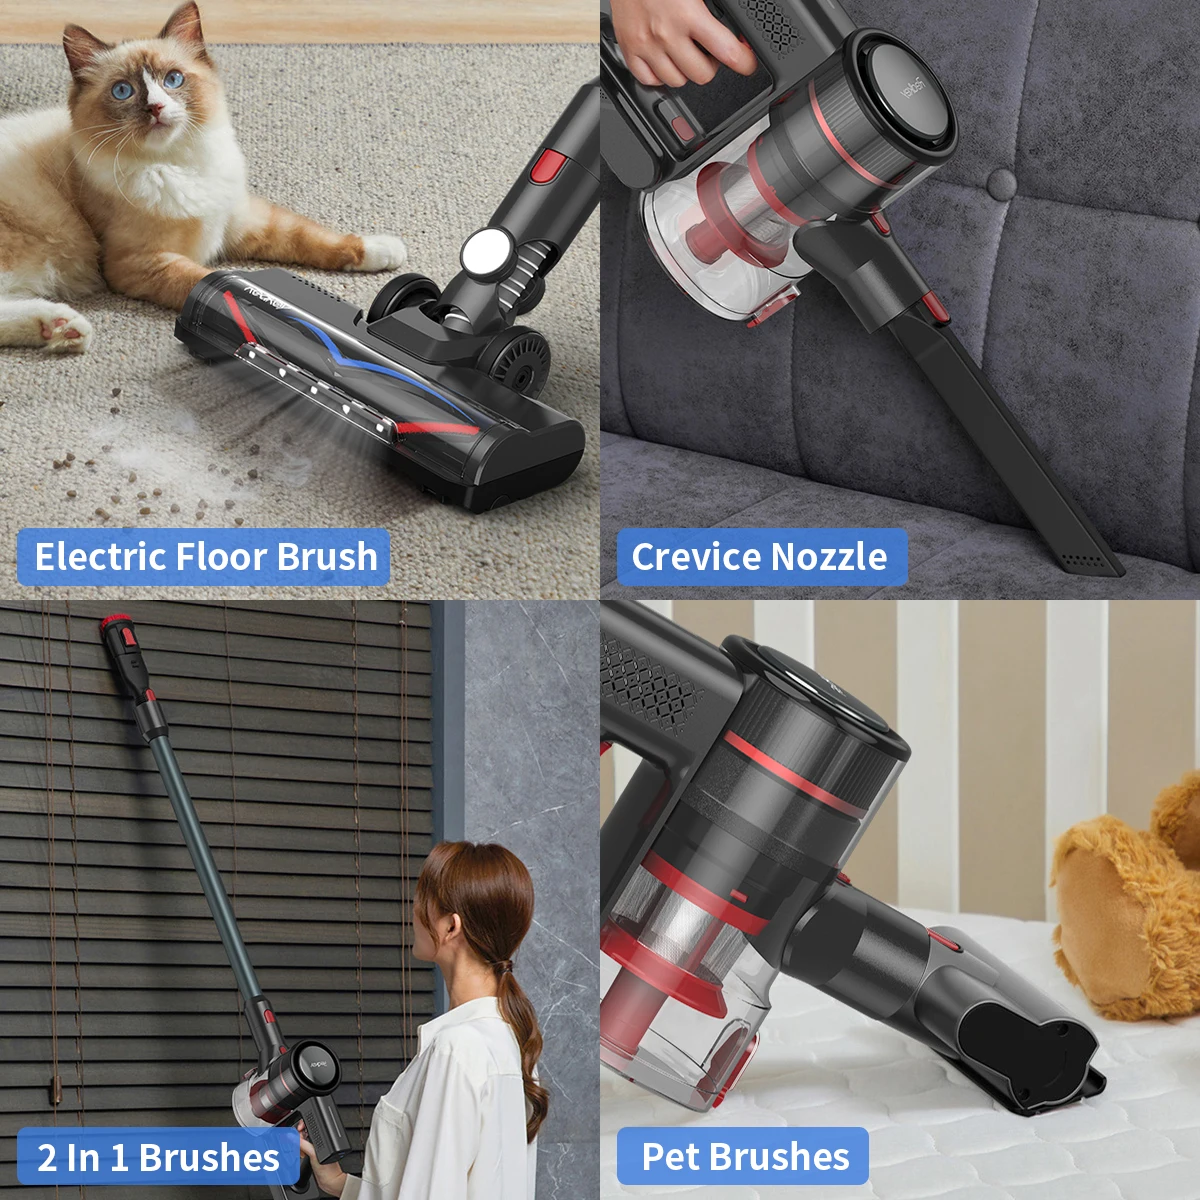  Proscenic Cordless Vacuum Cleaner, 30Kpa Cordless Stick Vacuum  with Strong Suction, Hardwood Floor Vacuum Whit Detachable Battery, Vacuum  Cleaner for Home…